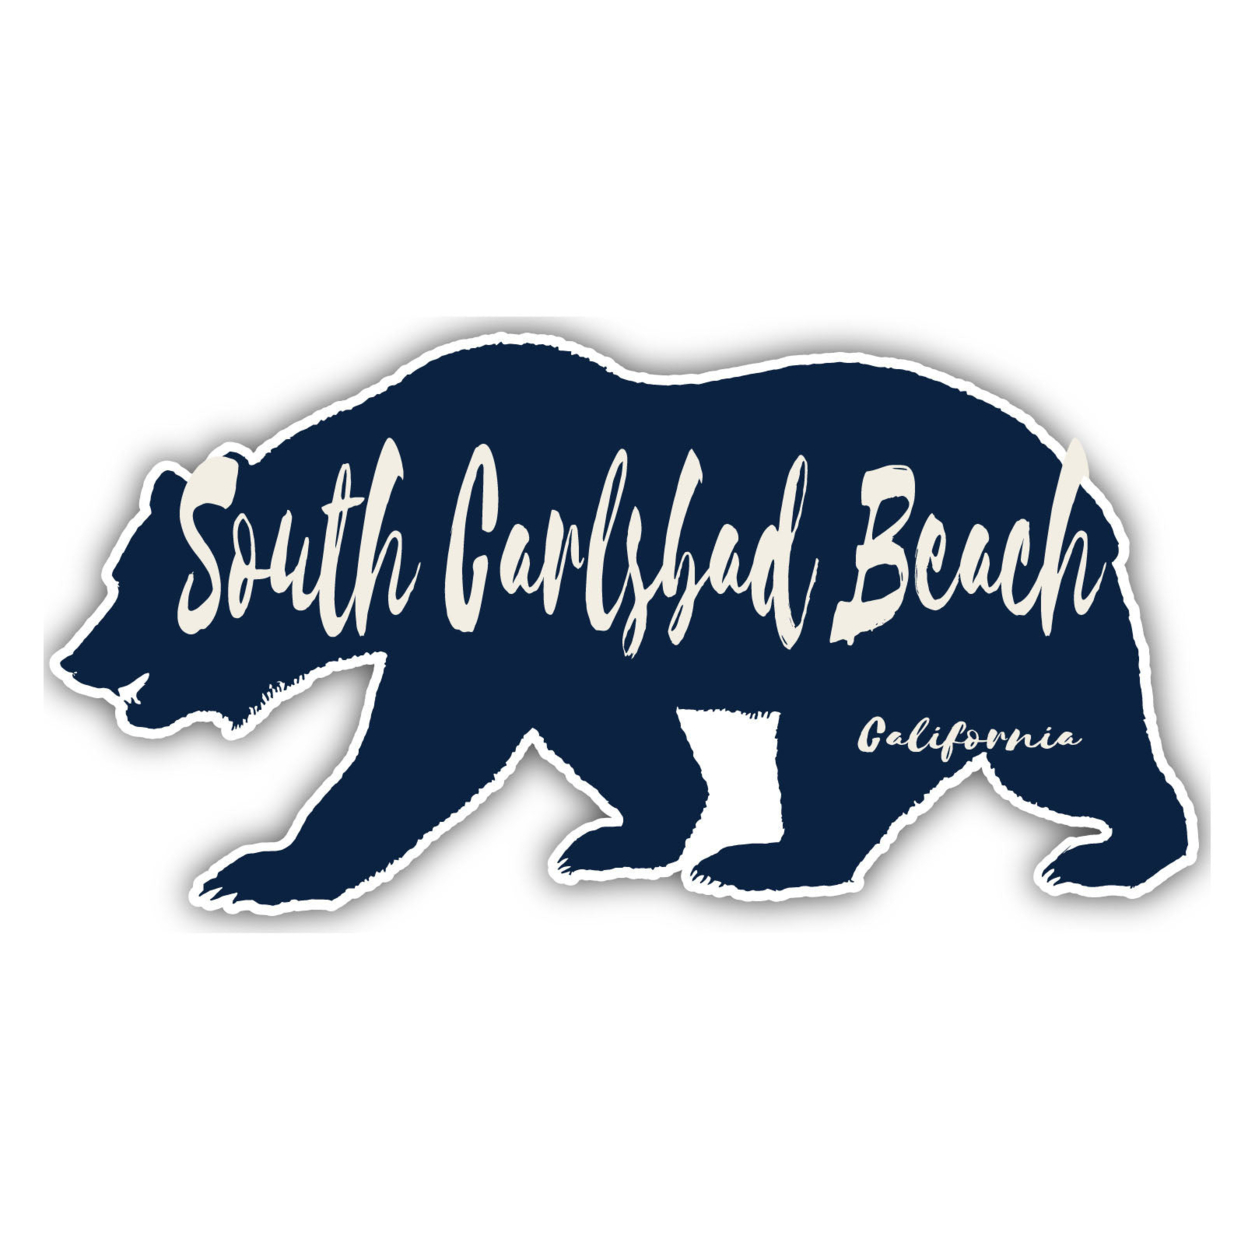 South Carlsbad Beach California Souvenir Decorative Stickers (Choose Theme And Size) - Single Unit, 4-Inch, Tent